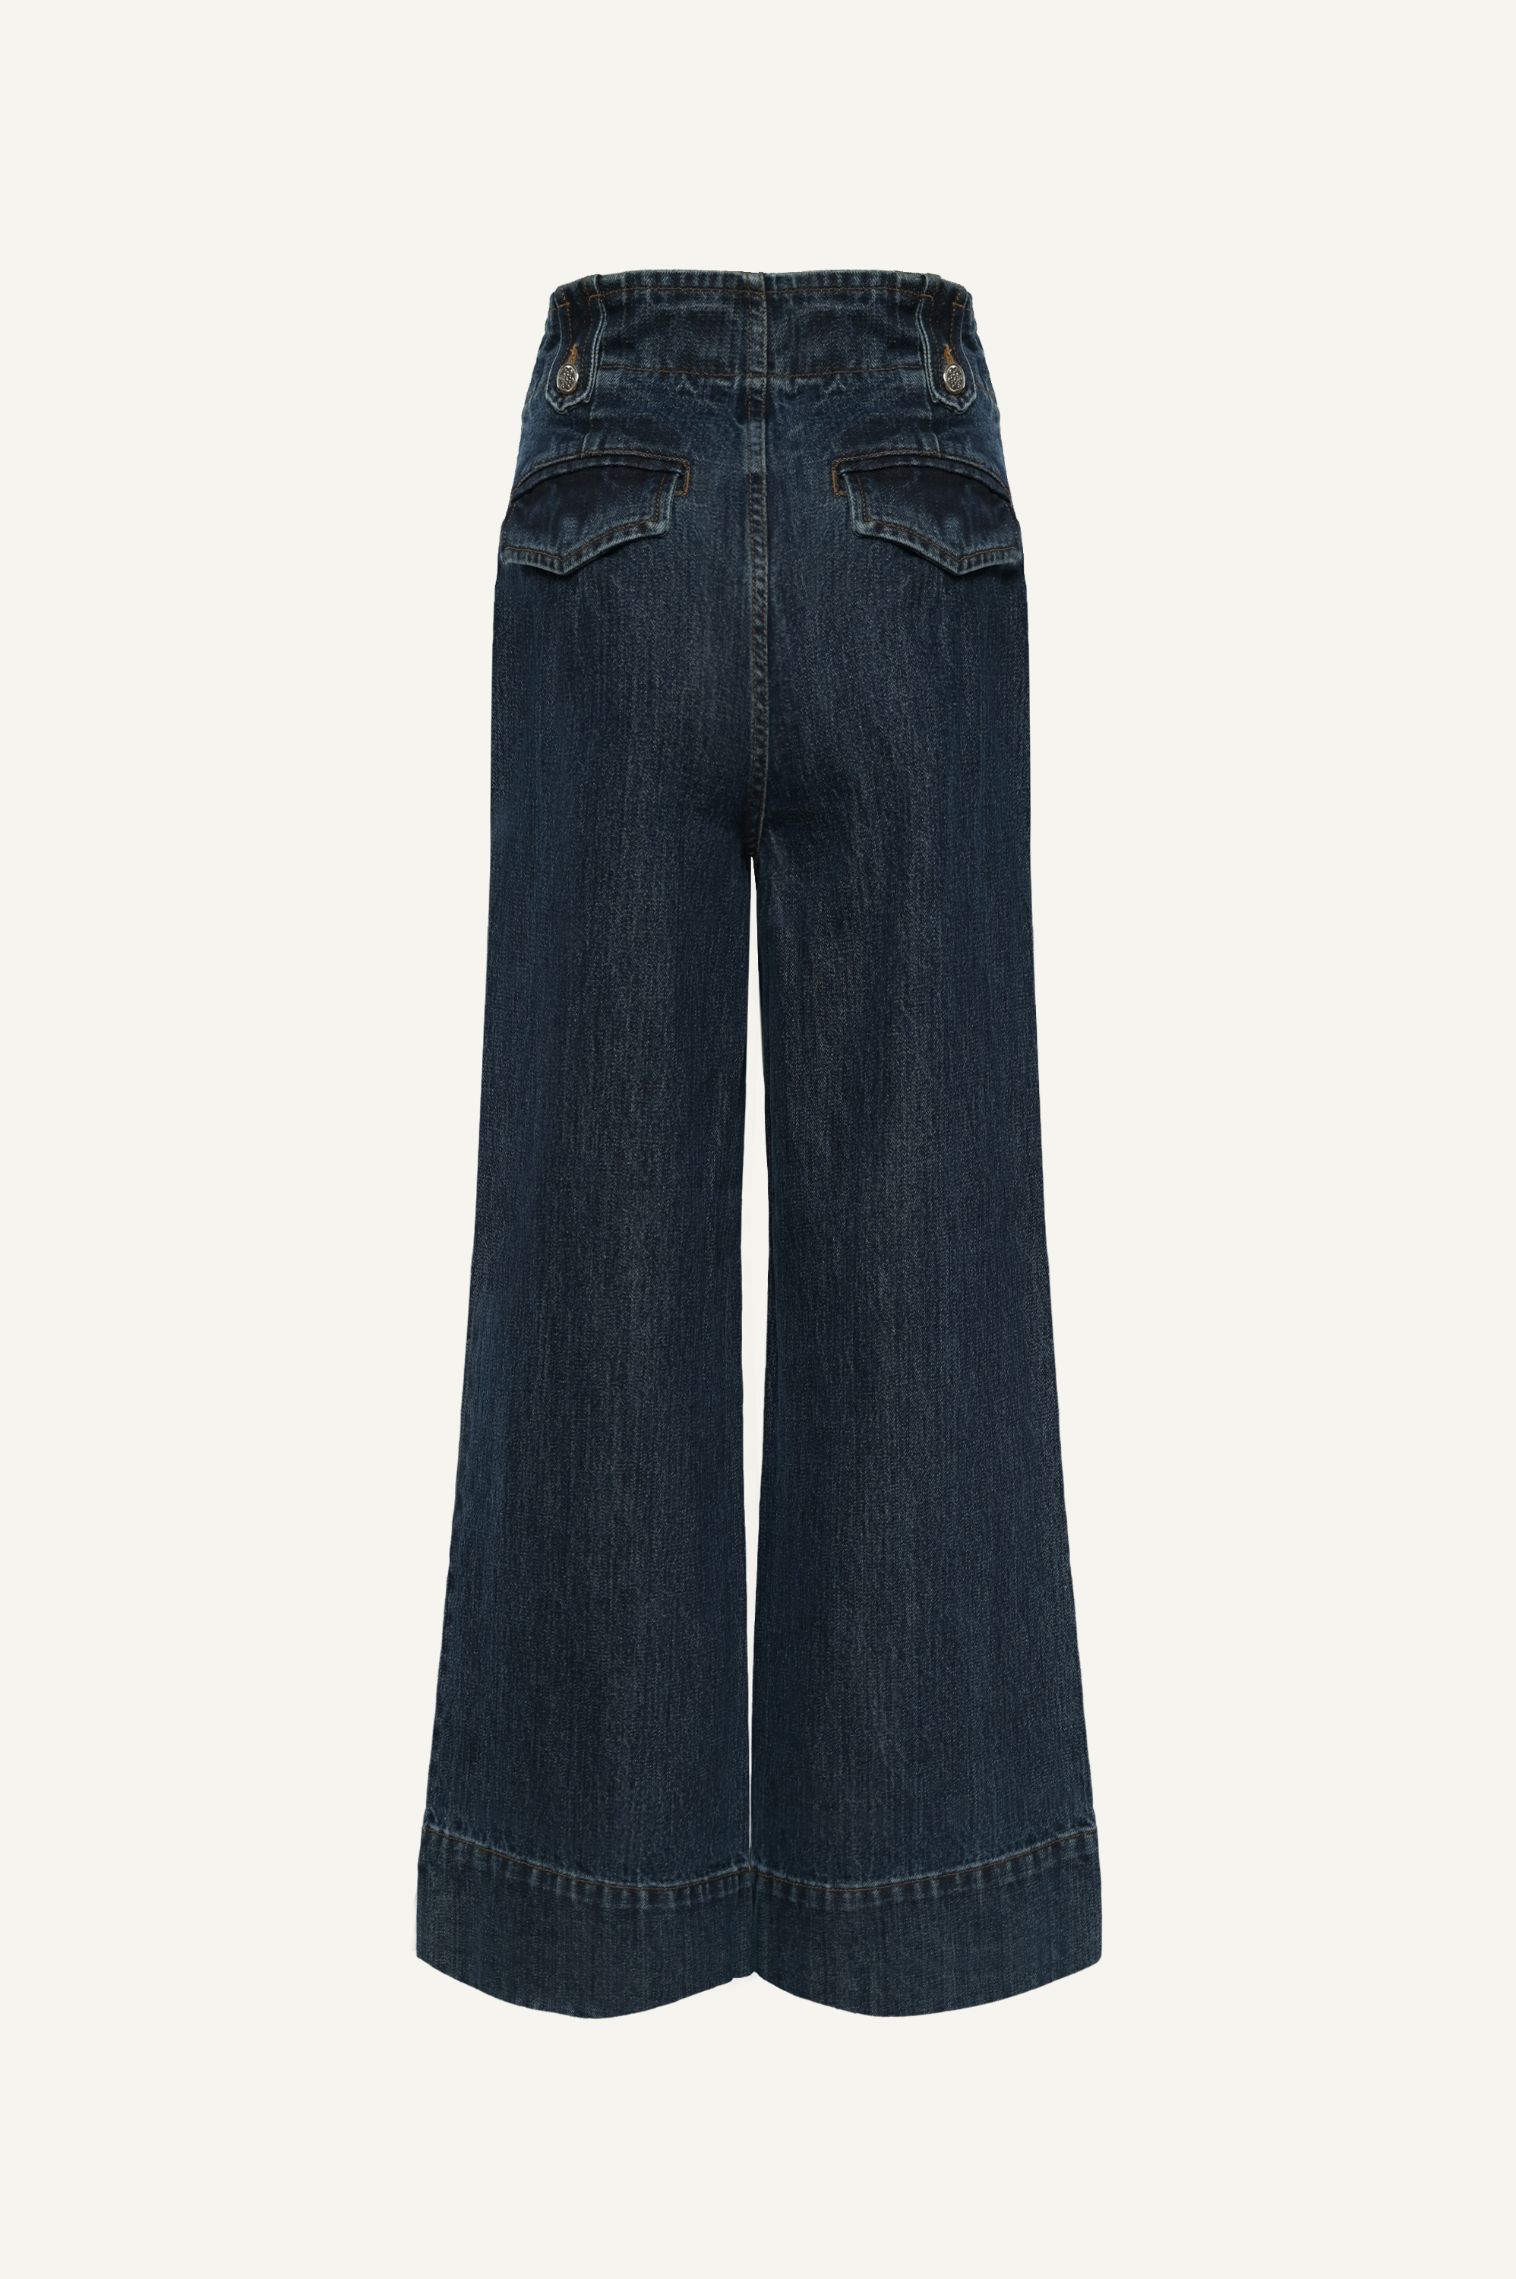 jean trousers,,casual pants, ,high-waisted fashionable jeans , daily trousers, casual jeans, everyday ,τζιν παντελονι, καμπανα, καμπανα παντελονι,ψηλομεσο ,ψηλοκαβαλο,ψηλοκαβαλο παντελονι